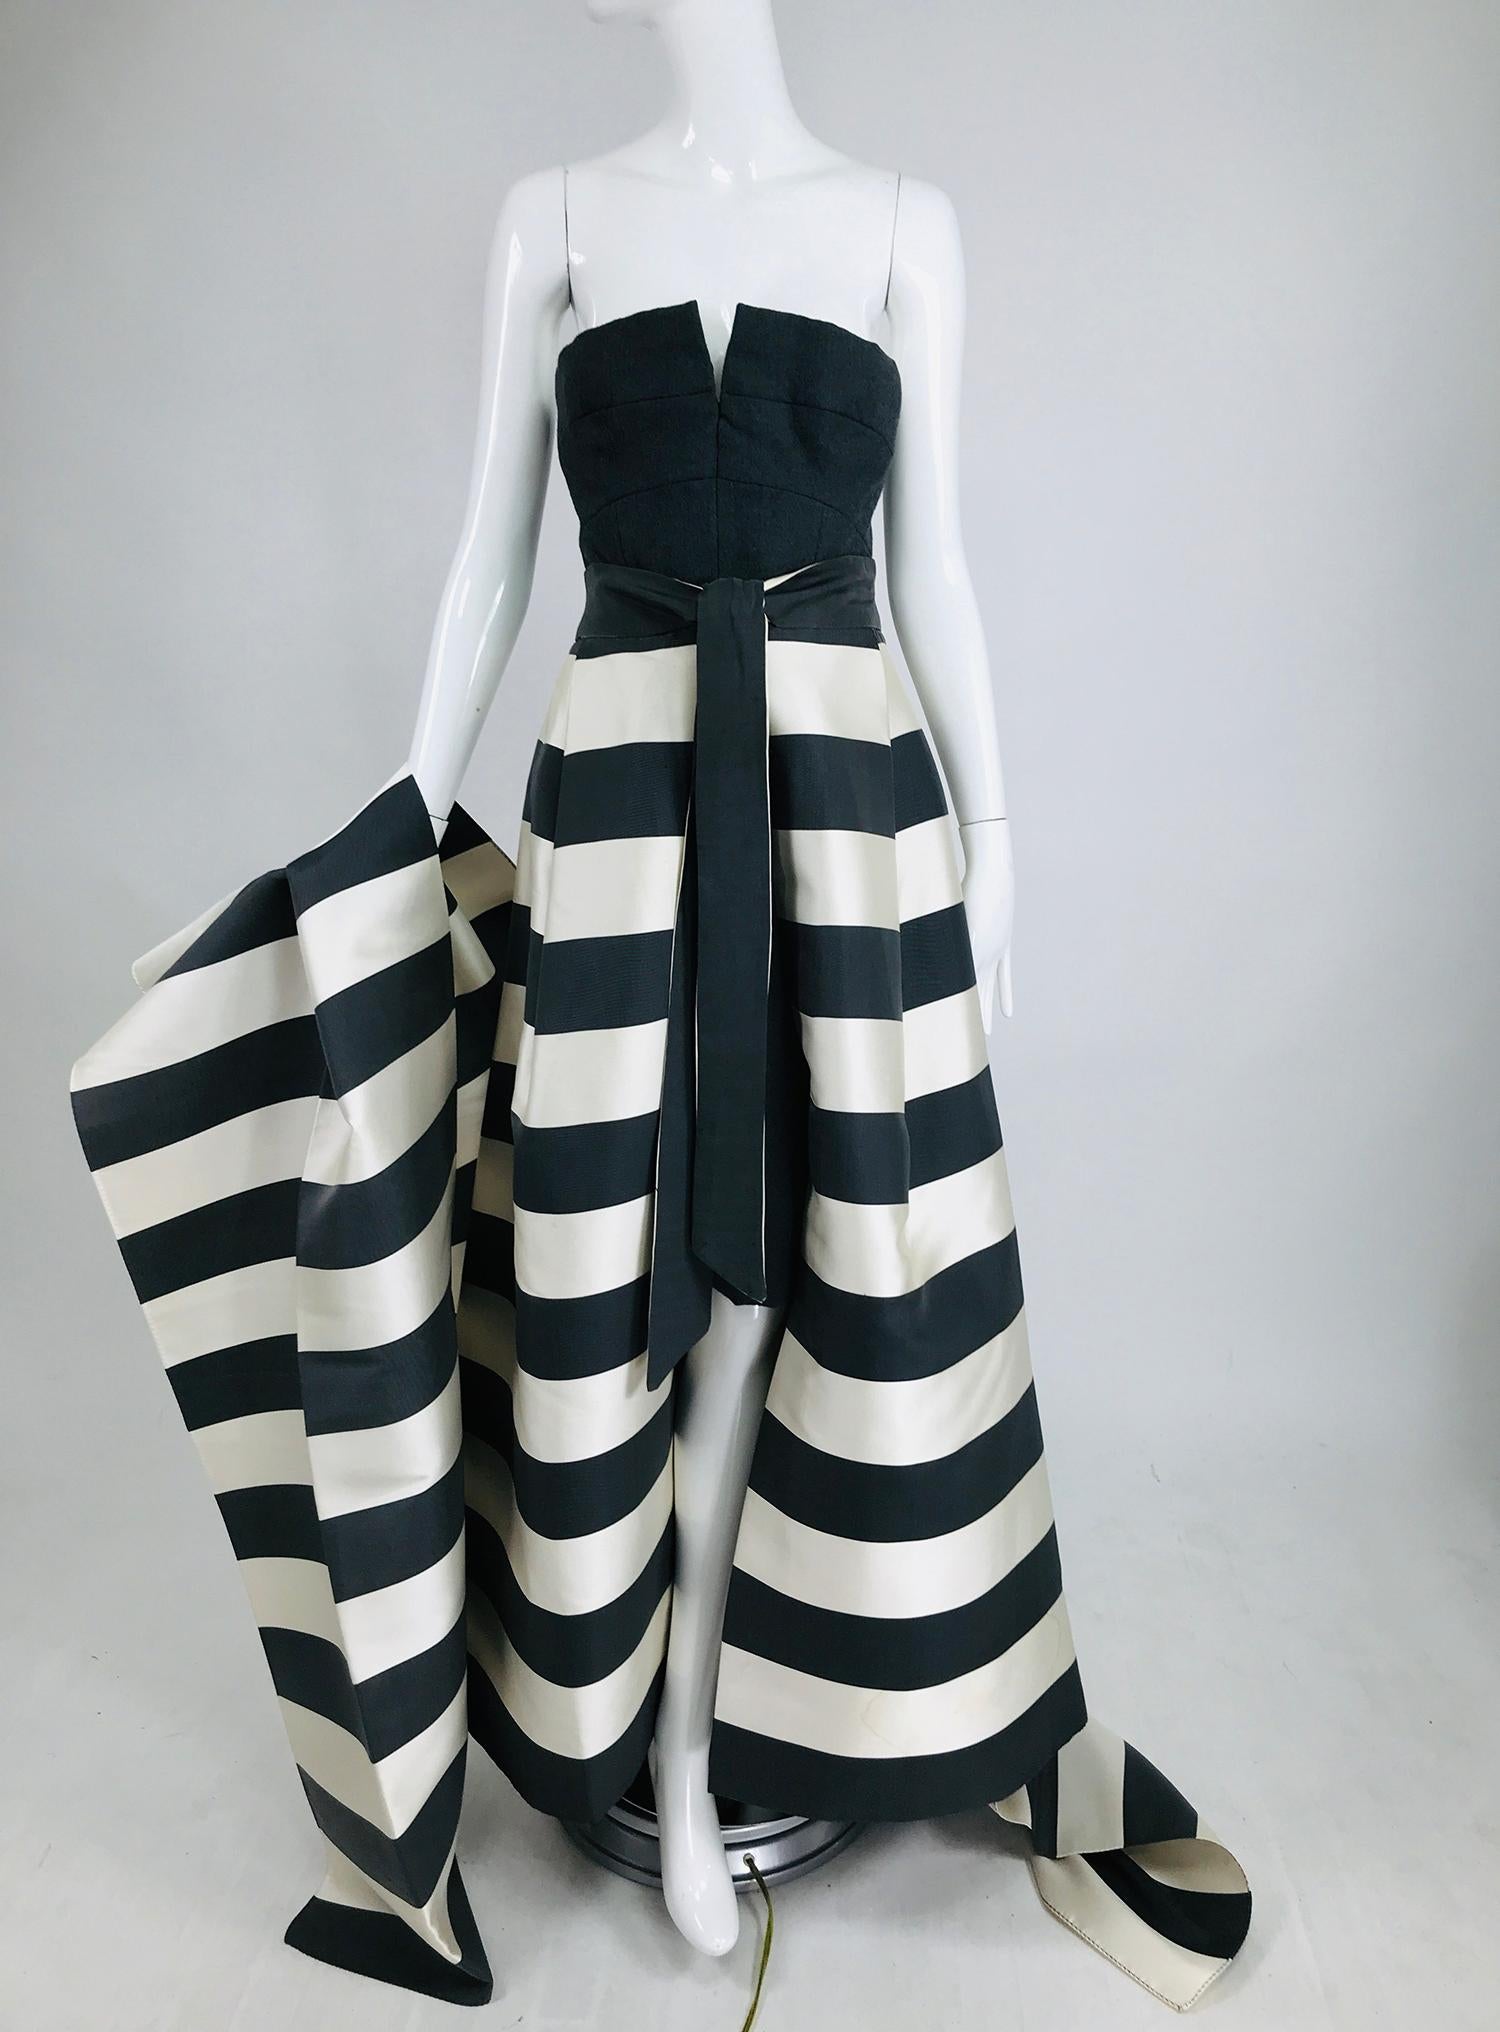 Vintage Oscar de la Renta black and white silk diagonal stripe, open front evening skirt, matching shawl and strapless dress. This amazing set is from the early 1990s. The skirt has a wide band waist with self ties at the front, there is an interior